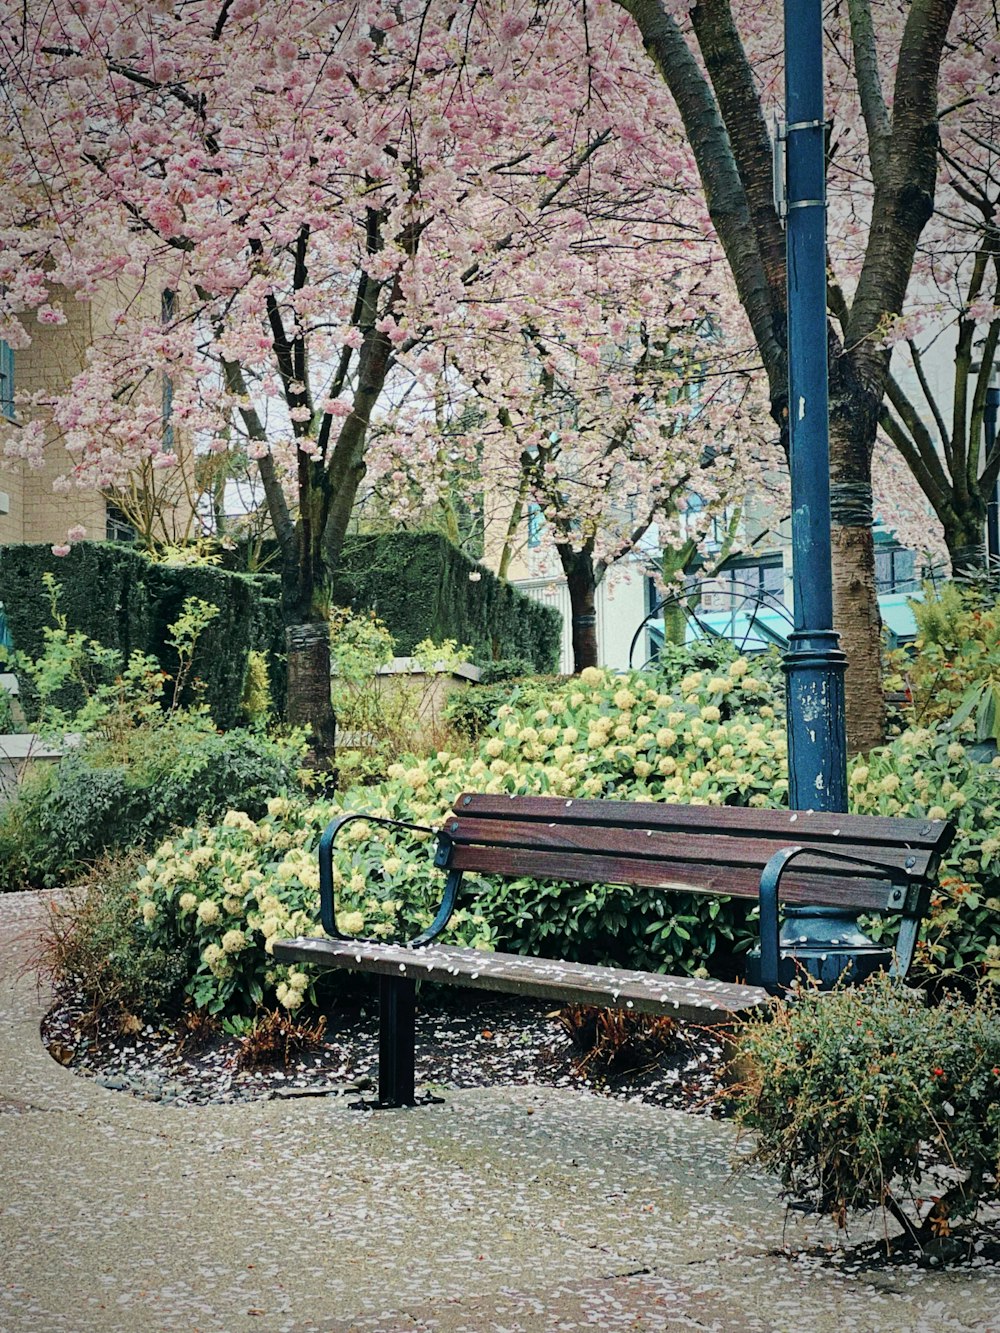 a park bench in front of a flowering tree